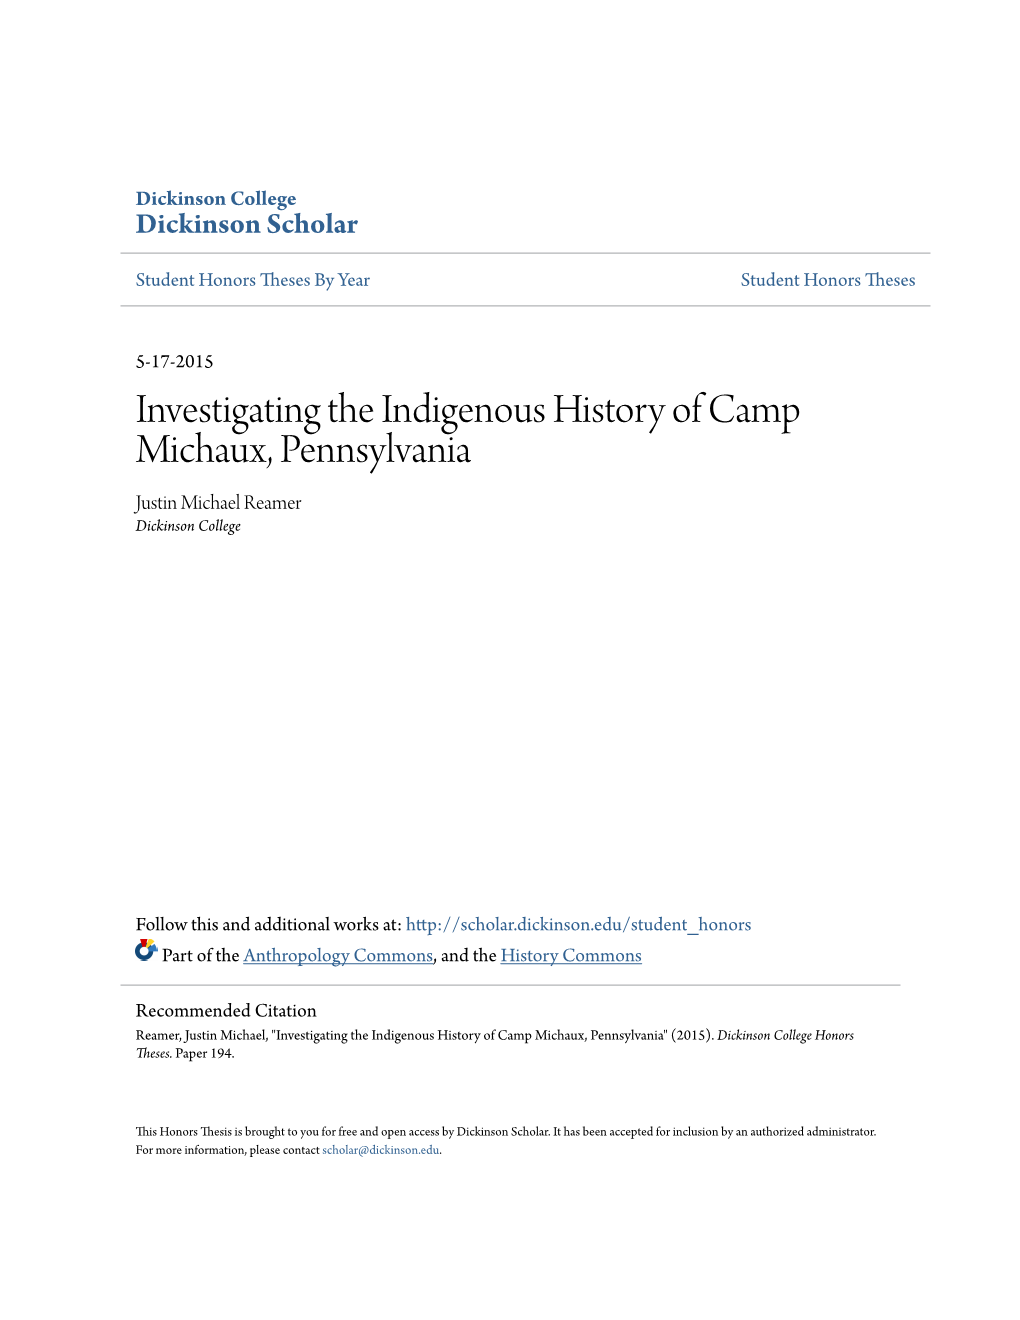 Investigating the Indigenous History of Camp Michaux, Pennsylvania Justin Michael Reamer Dickinson College